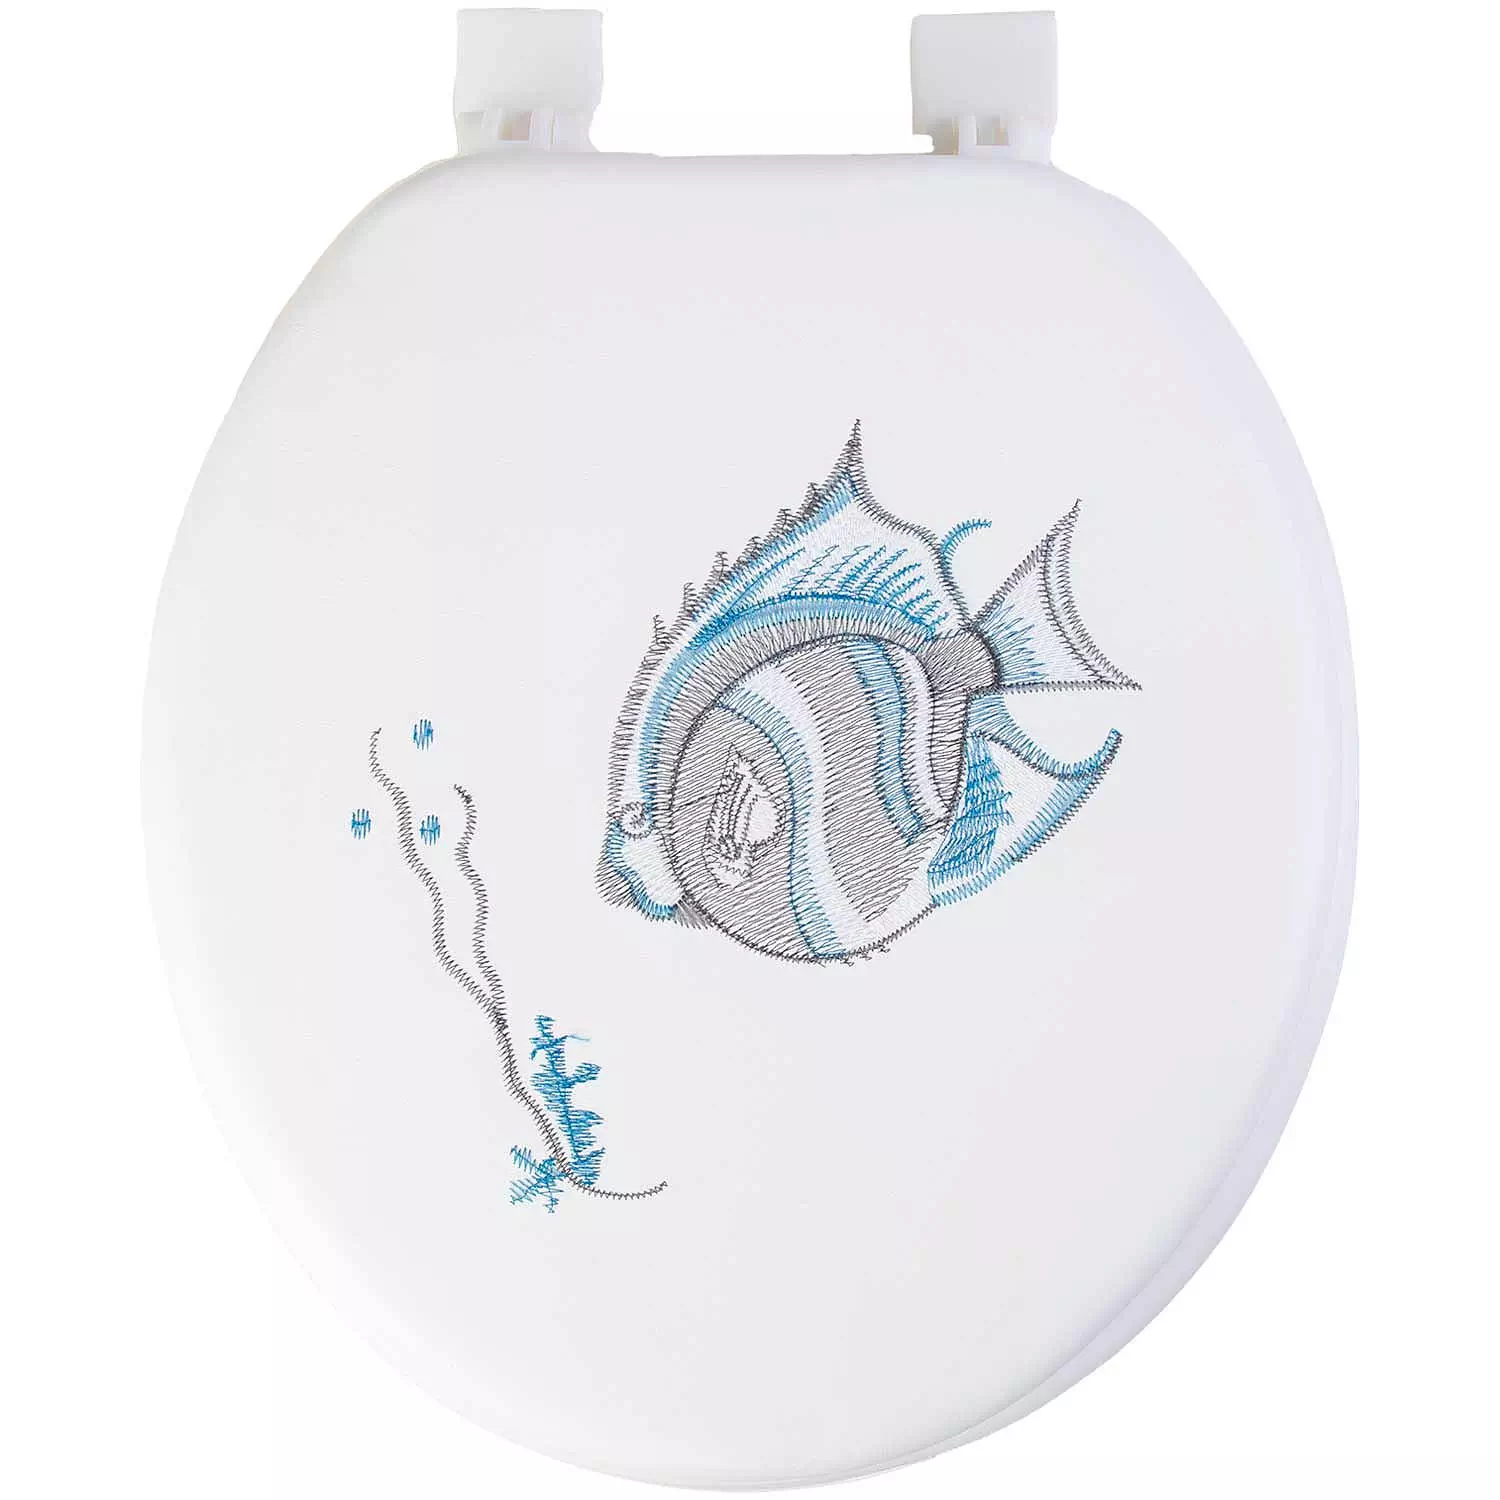 Cushioned toilet seat, blue fish embroidery